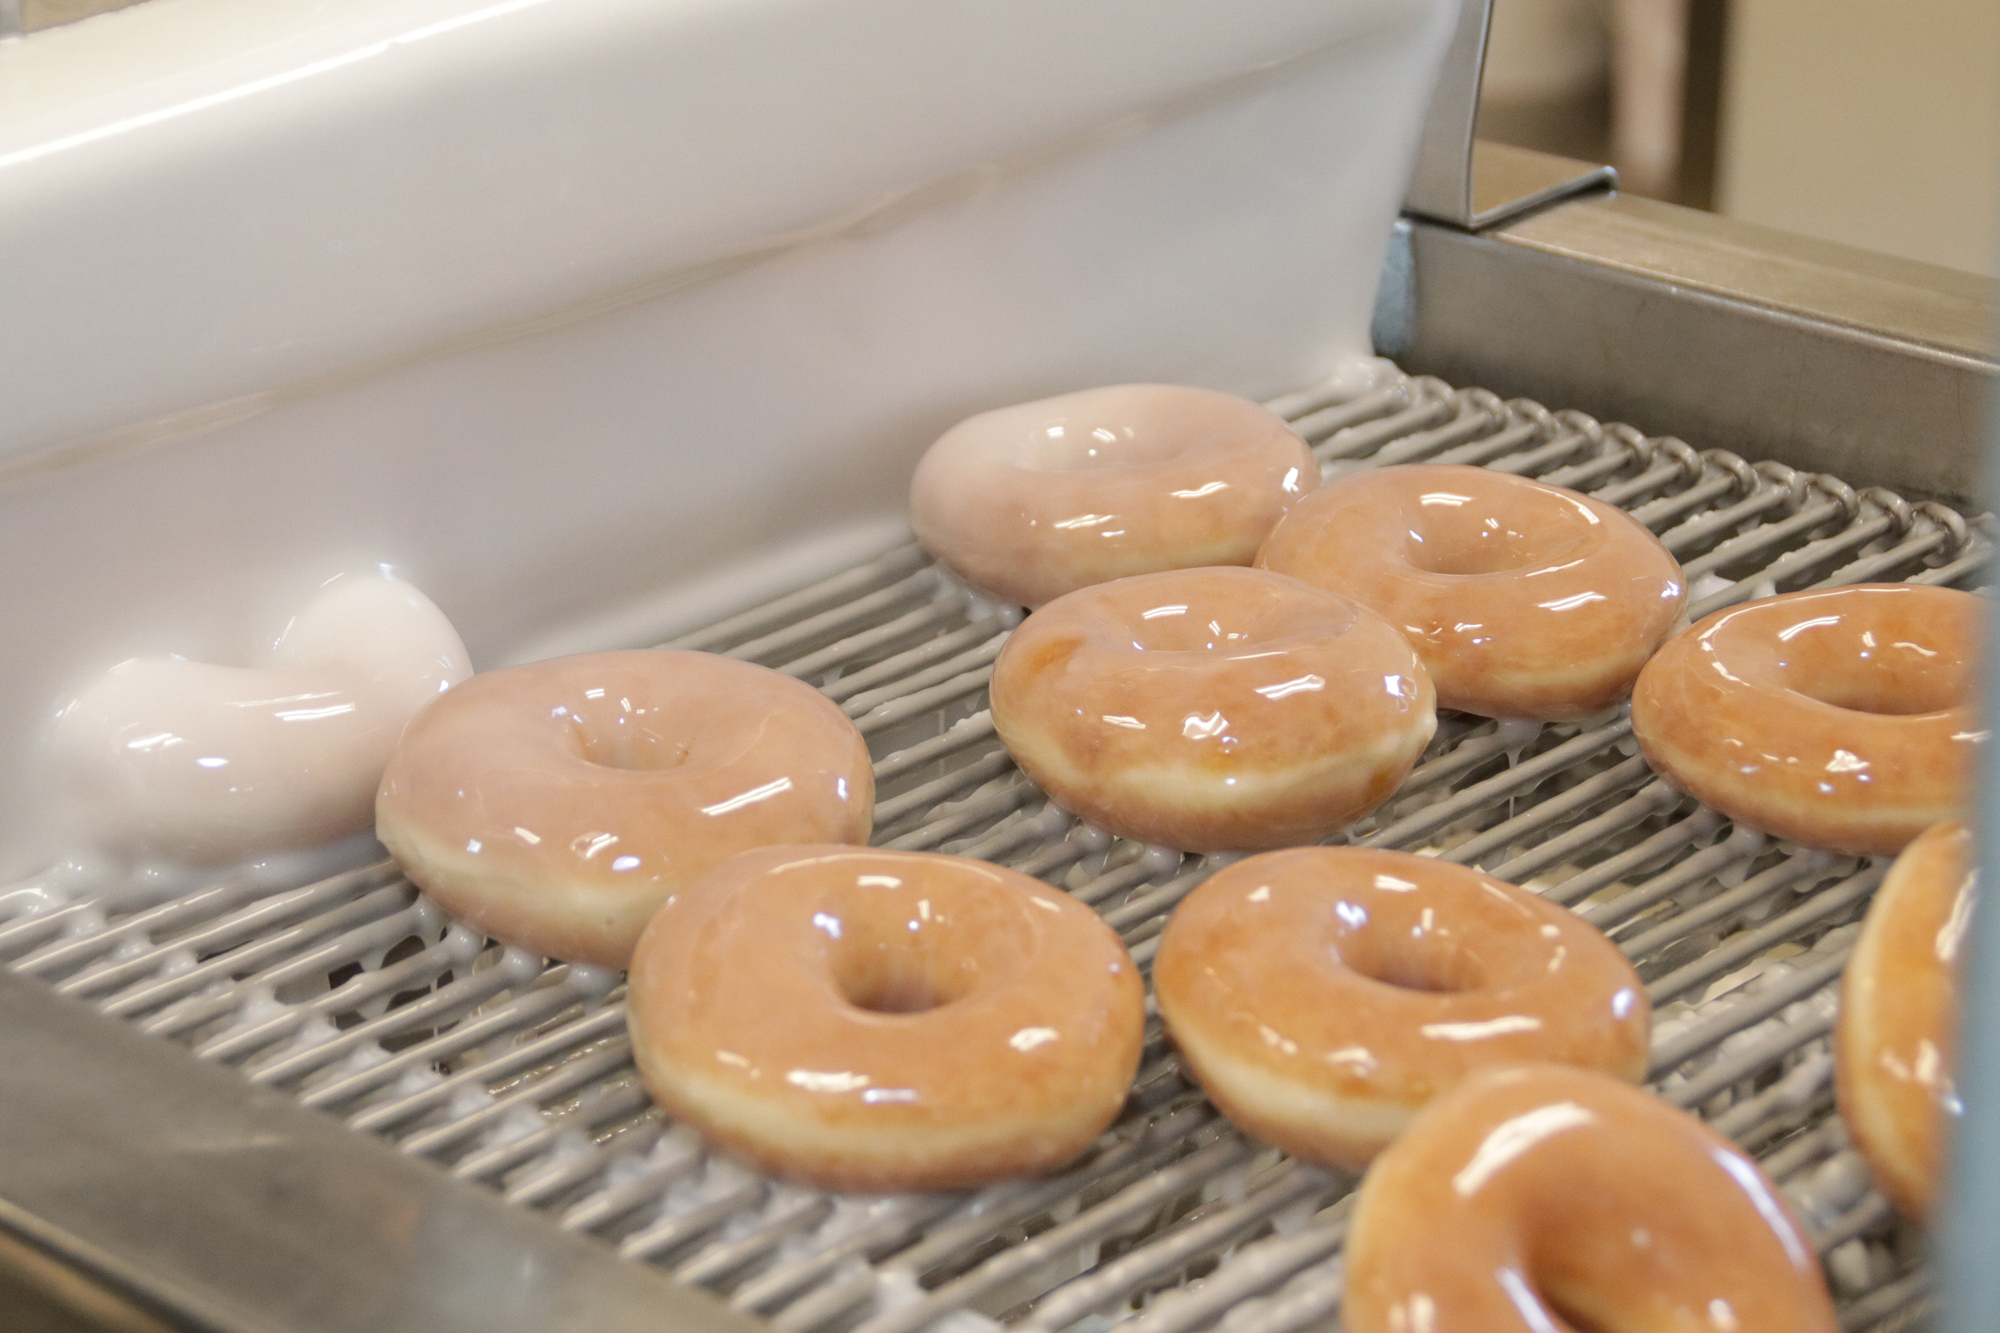 Freshly cooked doughnuts emerge from the wall of glaze. JimJett.com photo